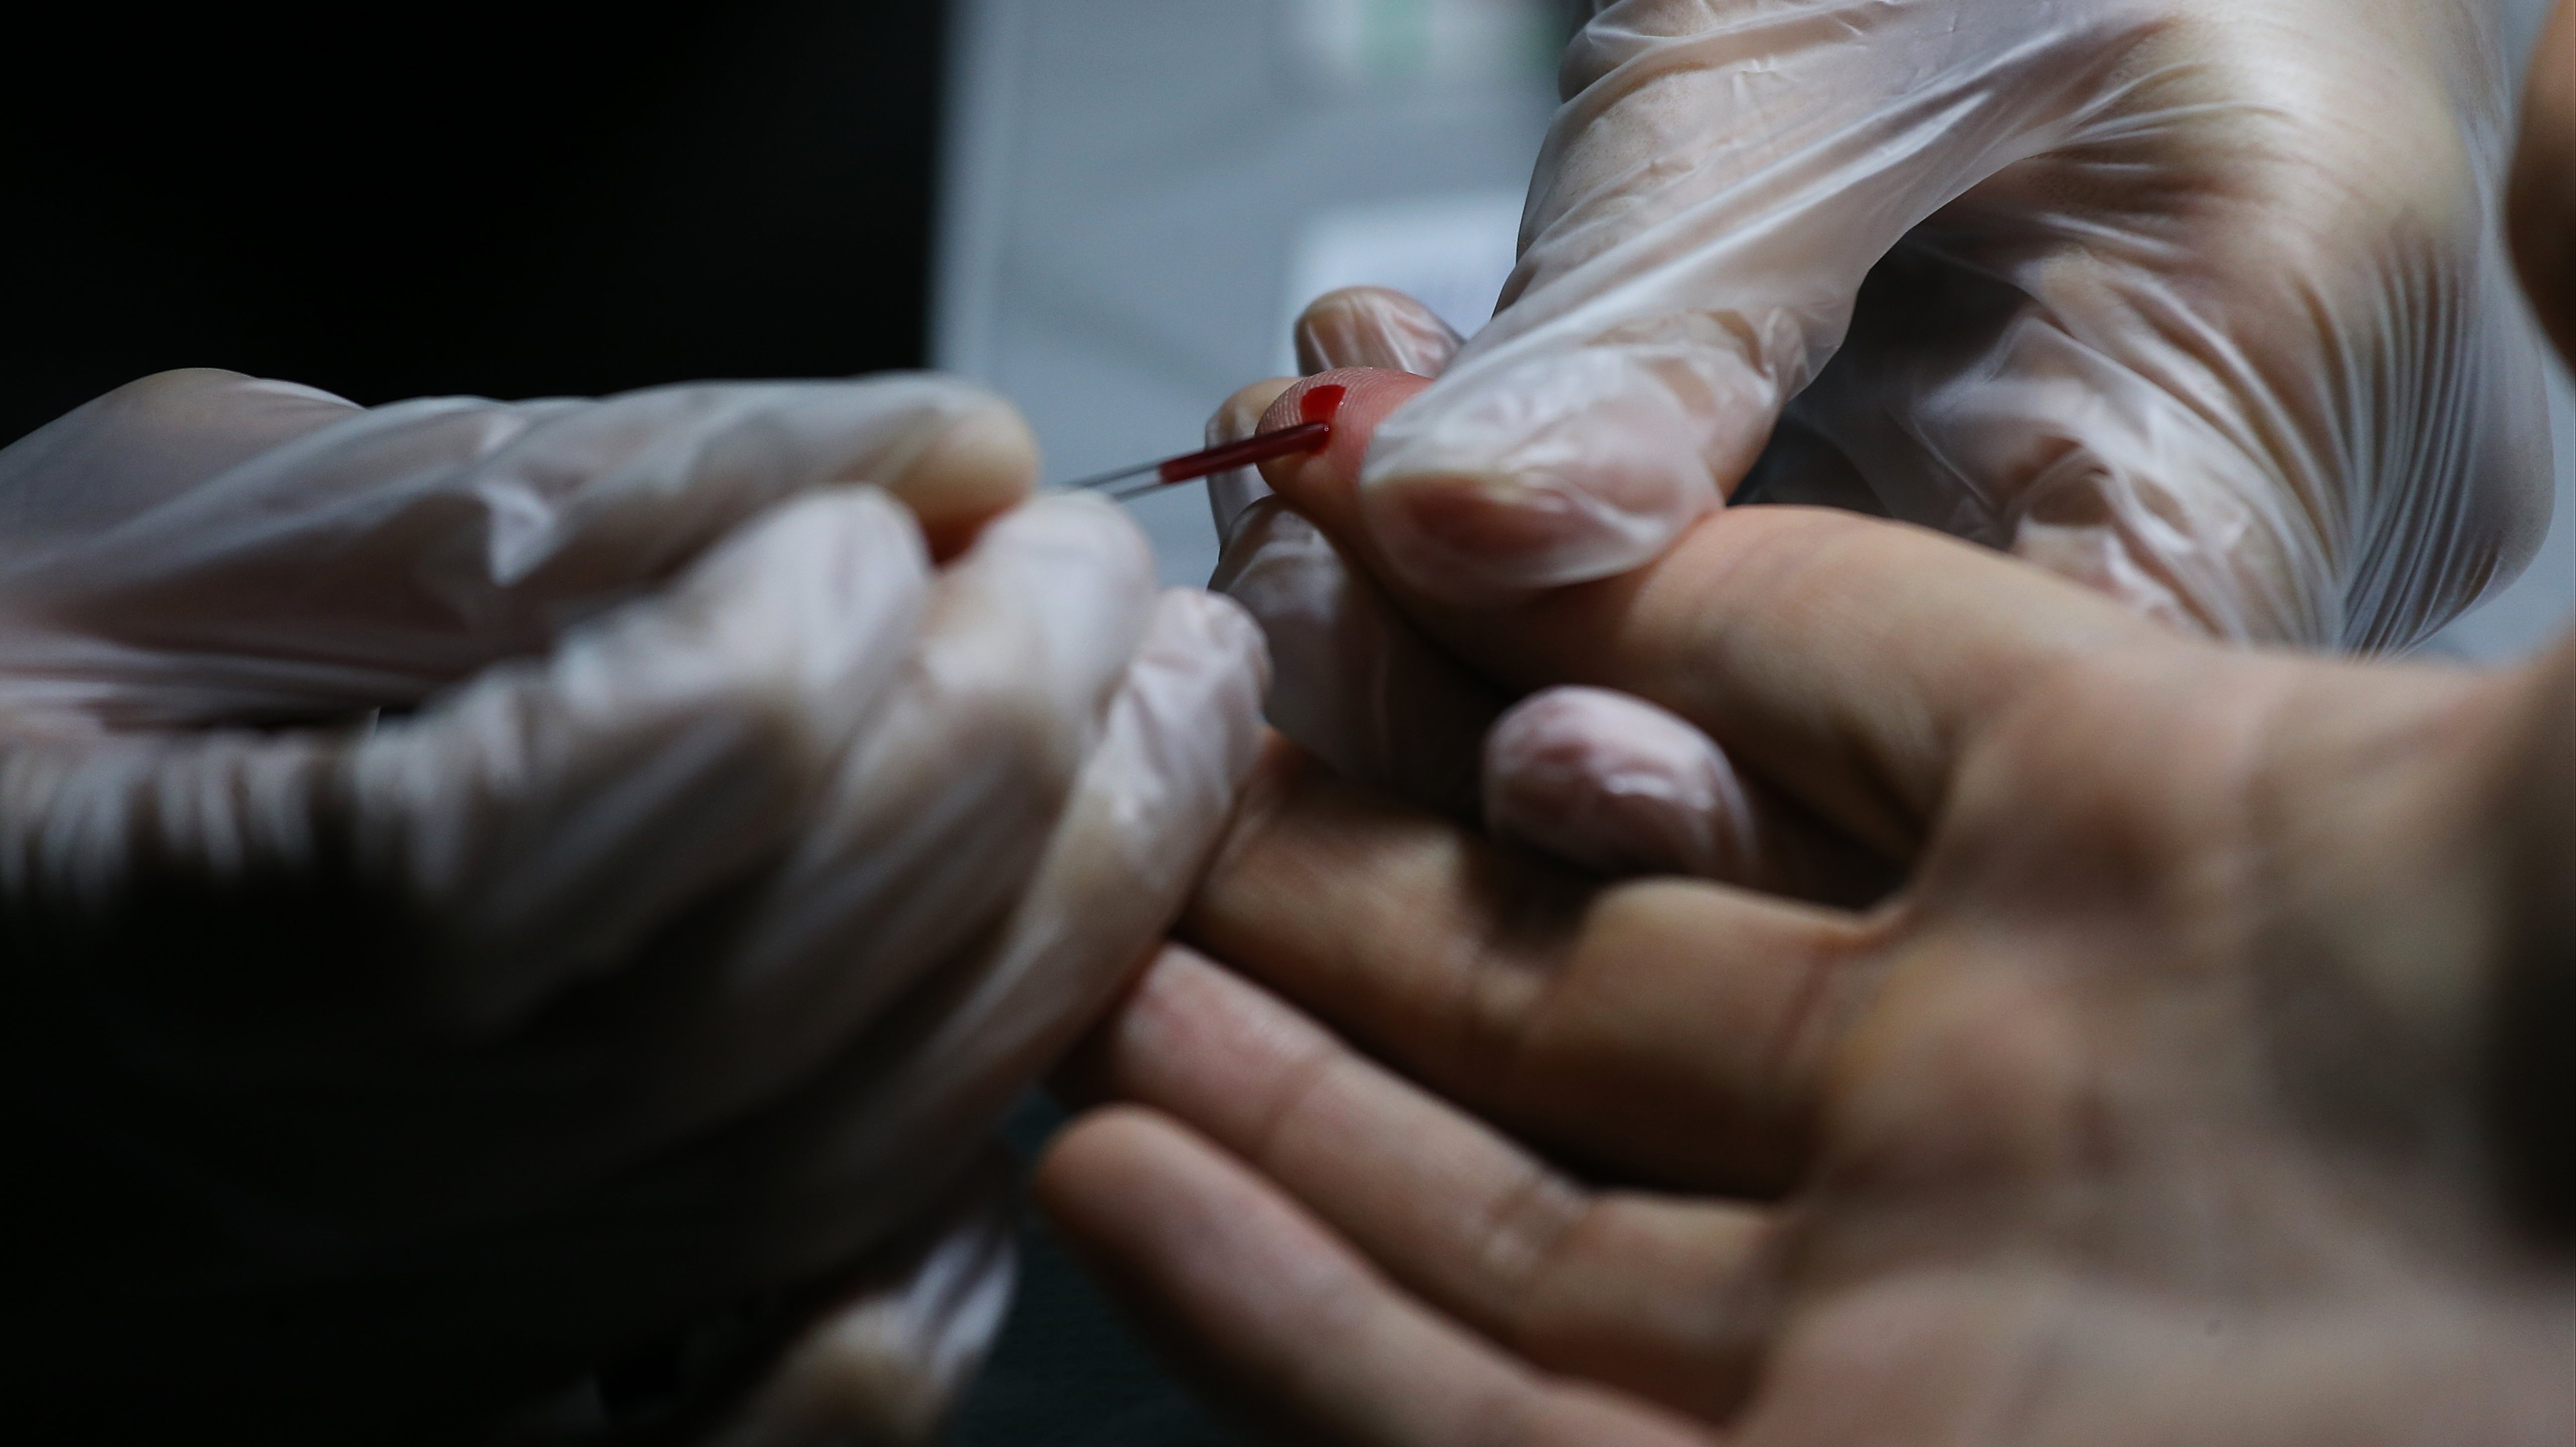 Finger-prick blood is needed for an HIV rapid test, which gives a result in 20 minutes at AIDS Concerns Centre, Jordan. 30NOV17 SCMP / Dickson Lee